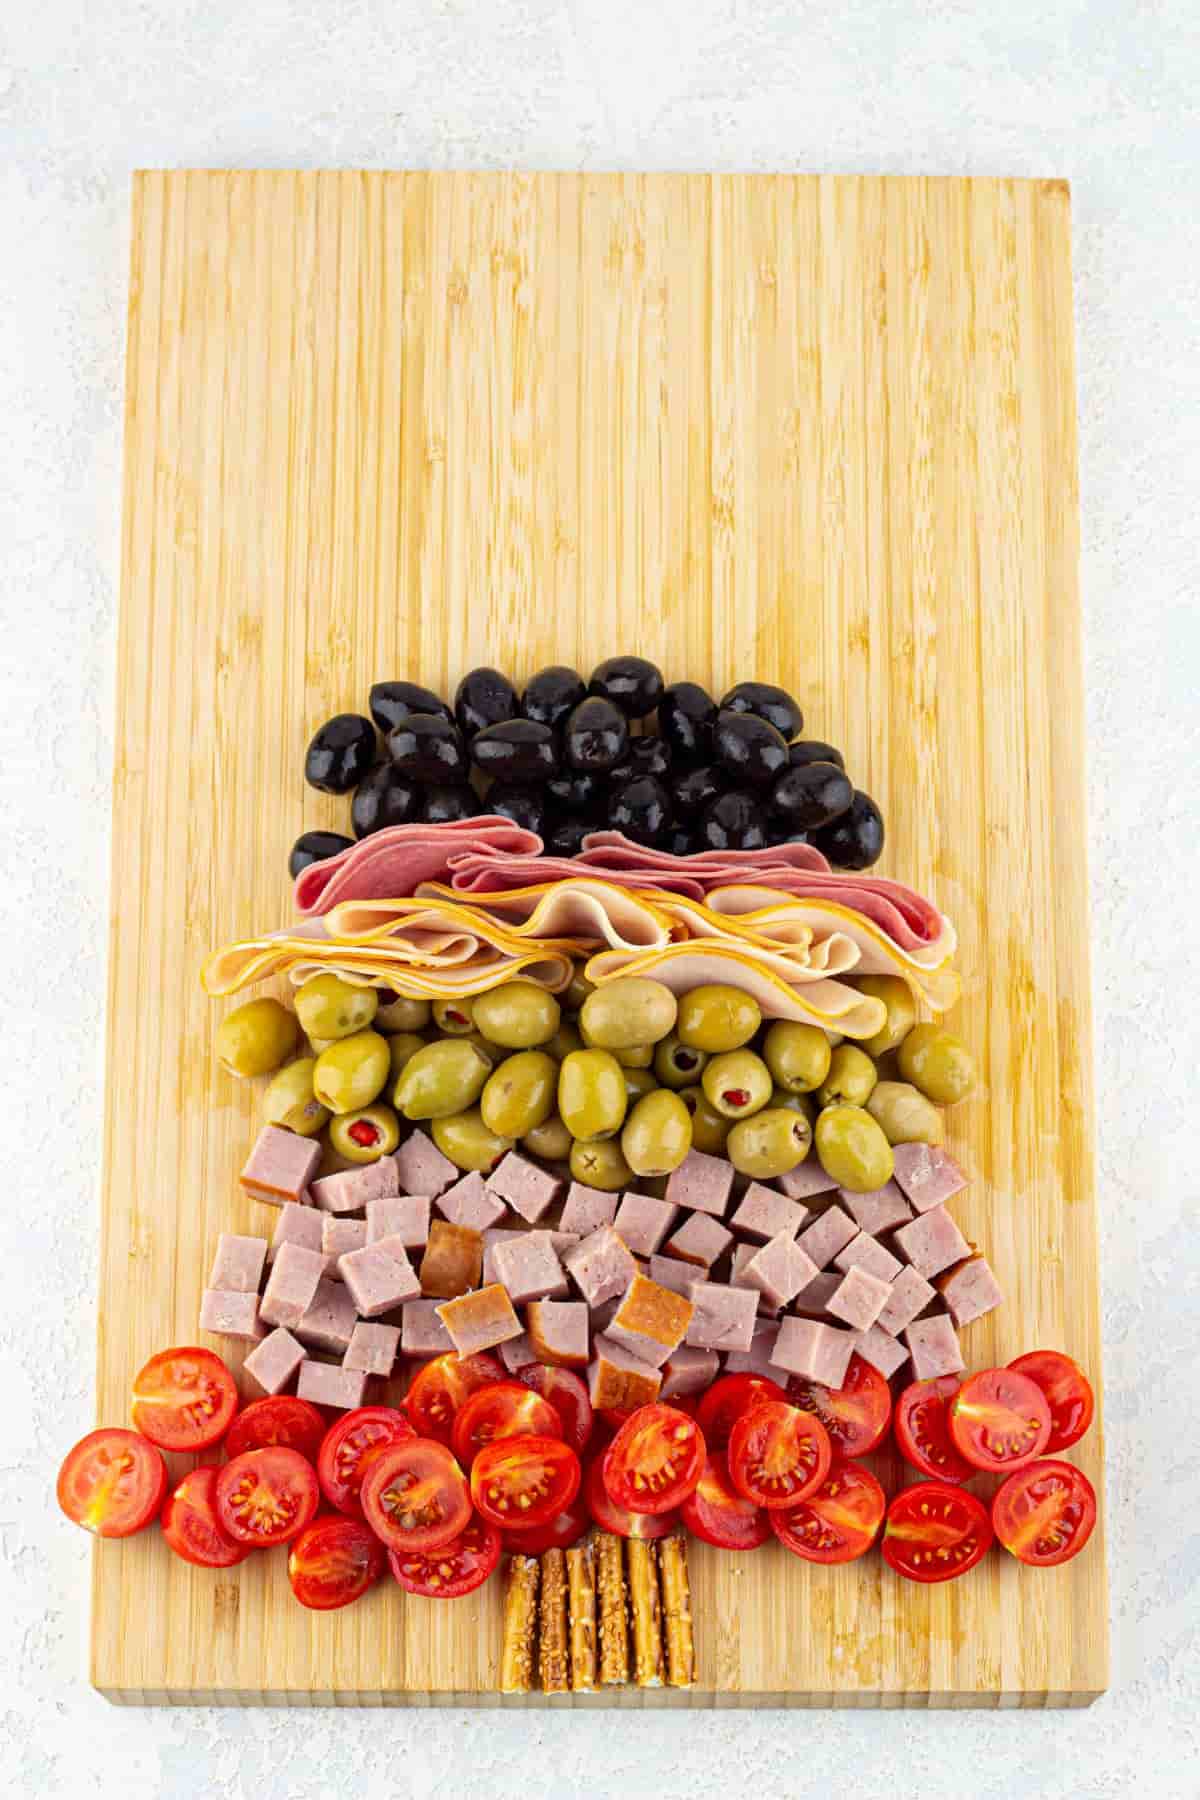 A cutting board with sesame straws, diced ham, sliced tomatoes, and green olives with chili pepper, sliced hams, and black olives on it.